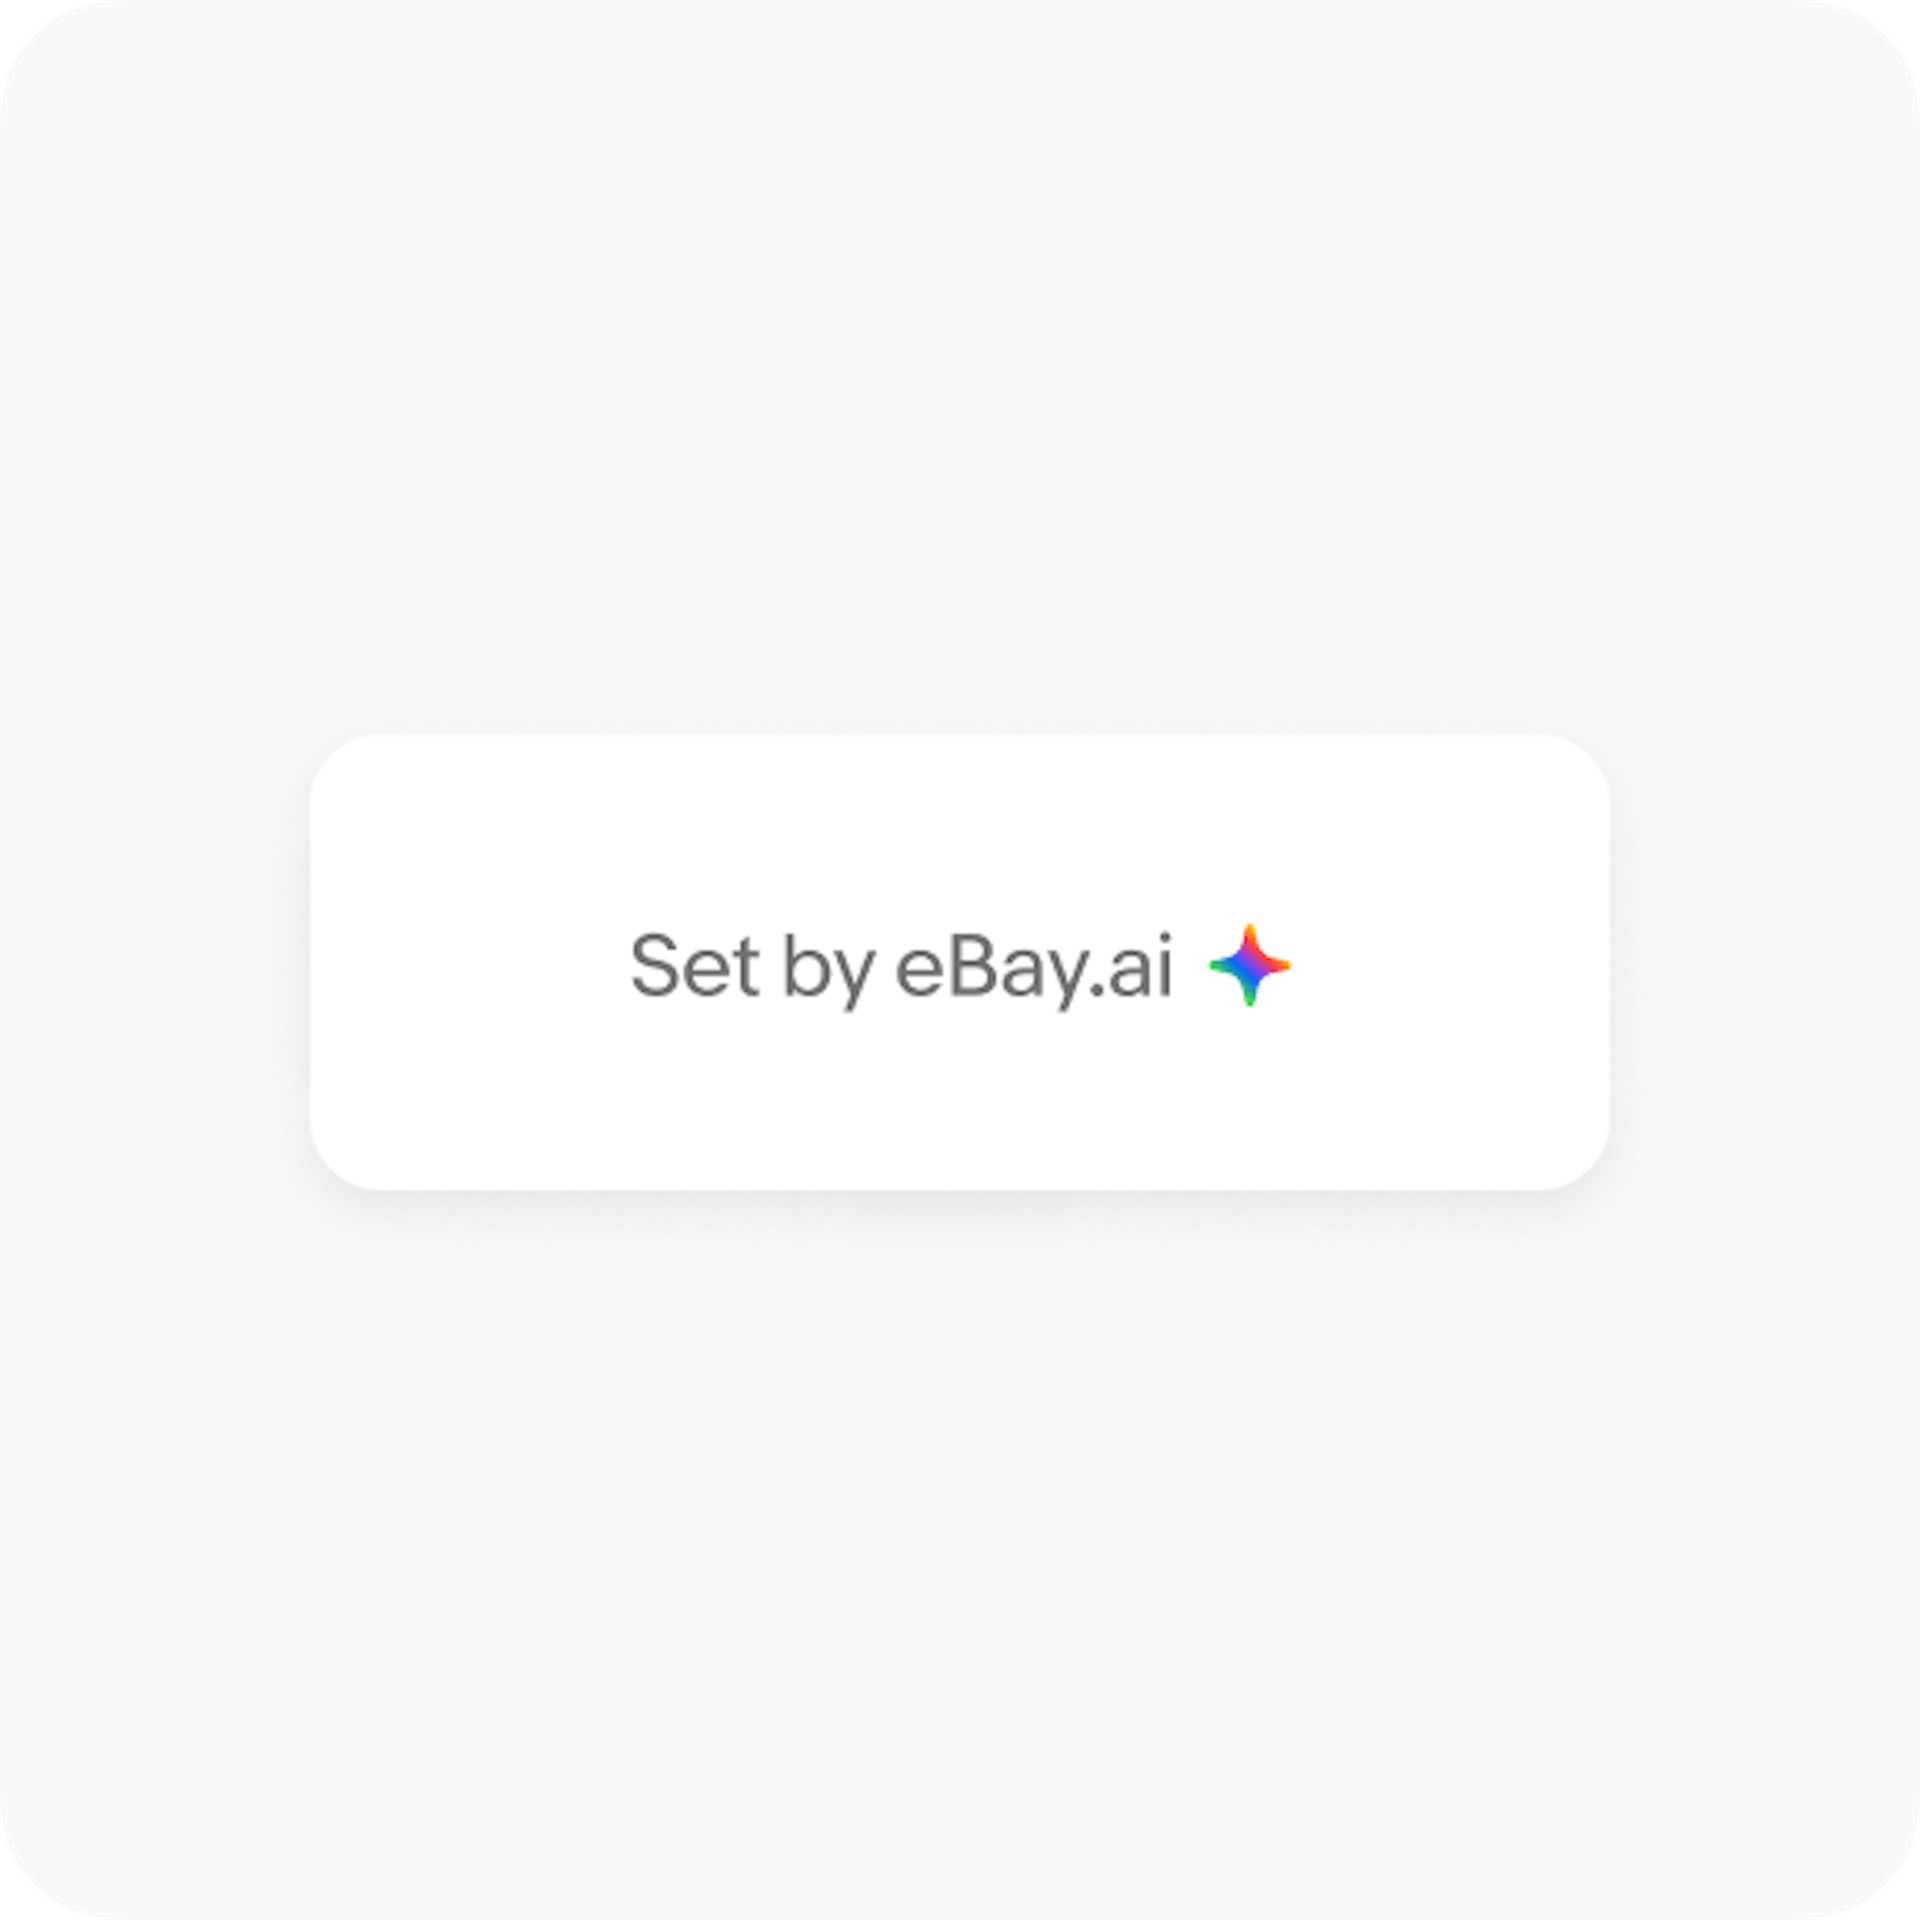 Example of a label that says “Set by eBay.ai” followed by the full spectrum icon in color.